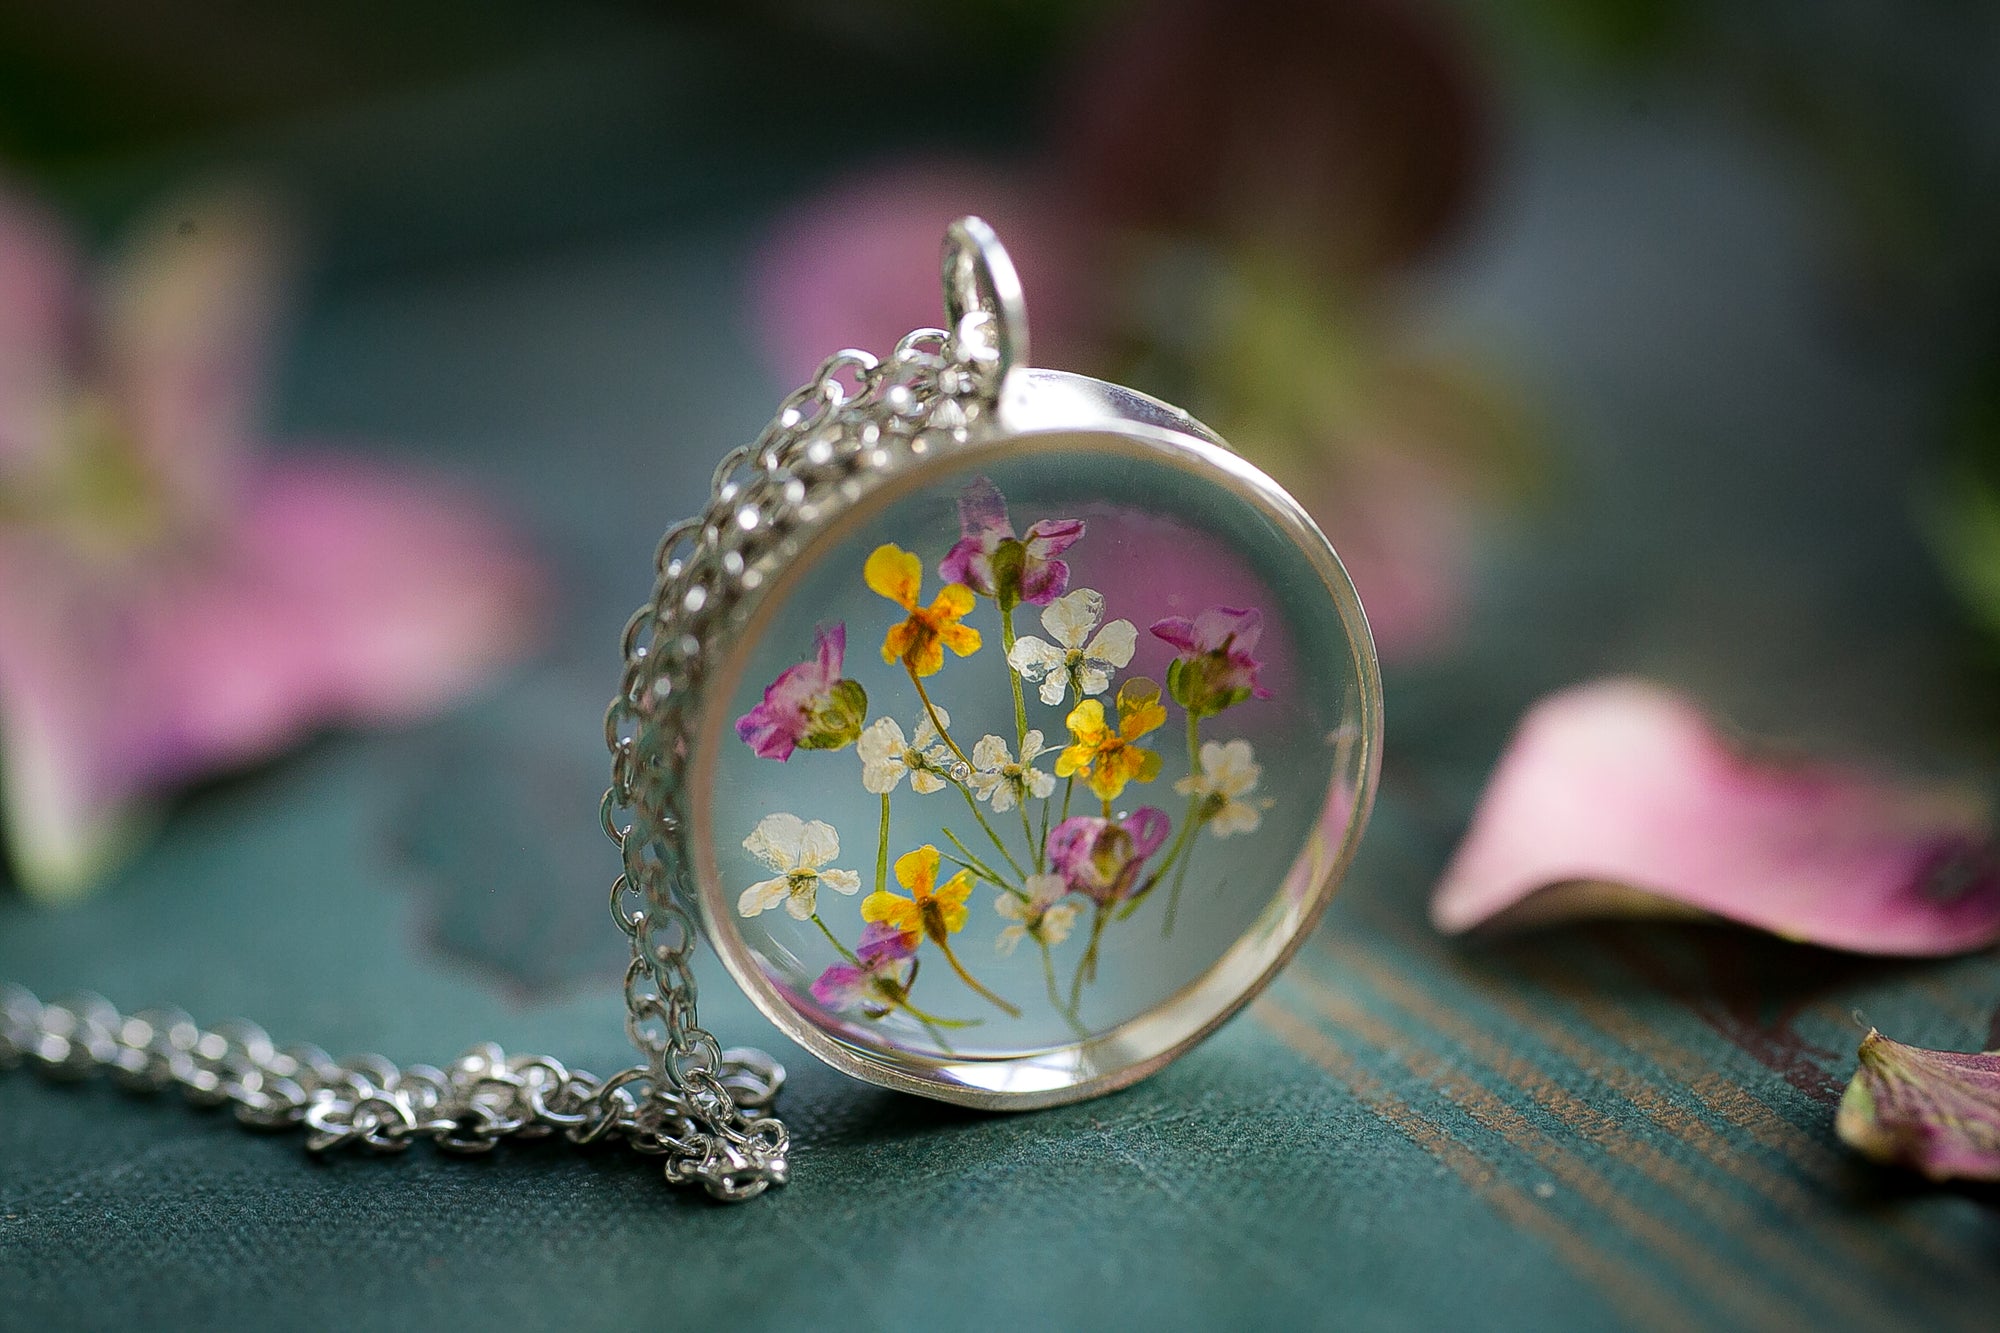 Floral Magnifying Glass Pendant Necklace / Handmade by Ivry Belle